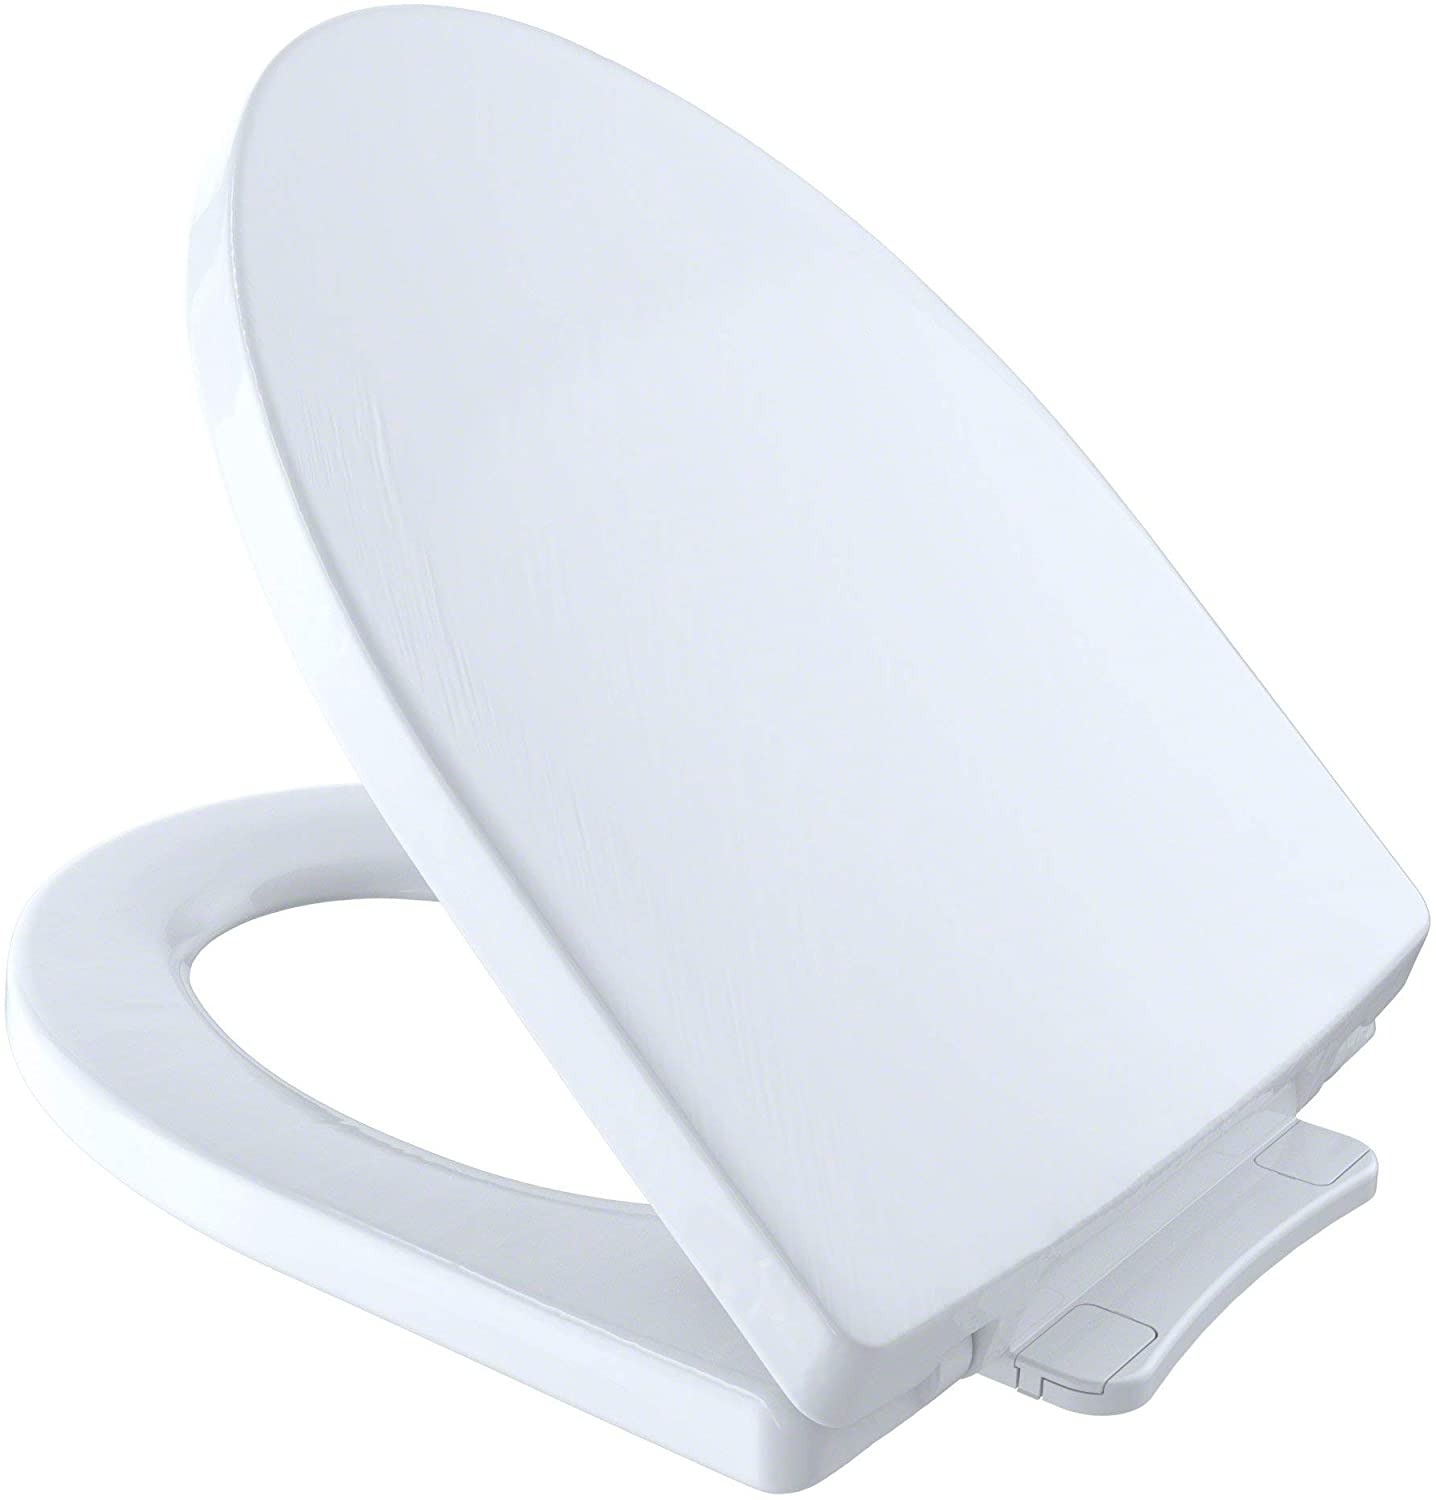 TOTO SS214#01 Soiree SoftClose Elongated Toilet Seat